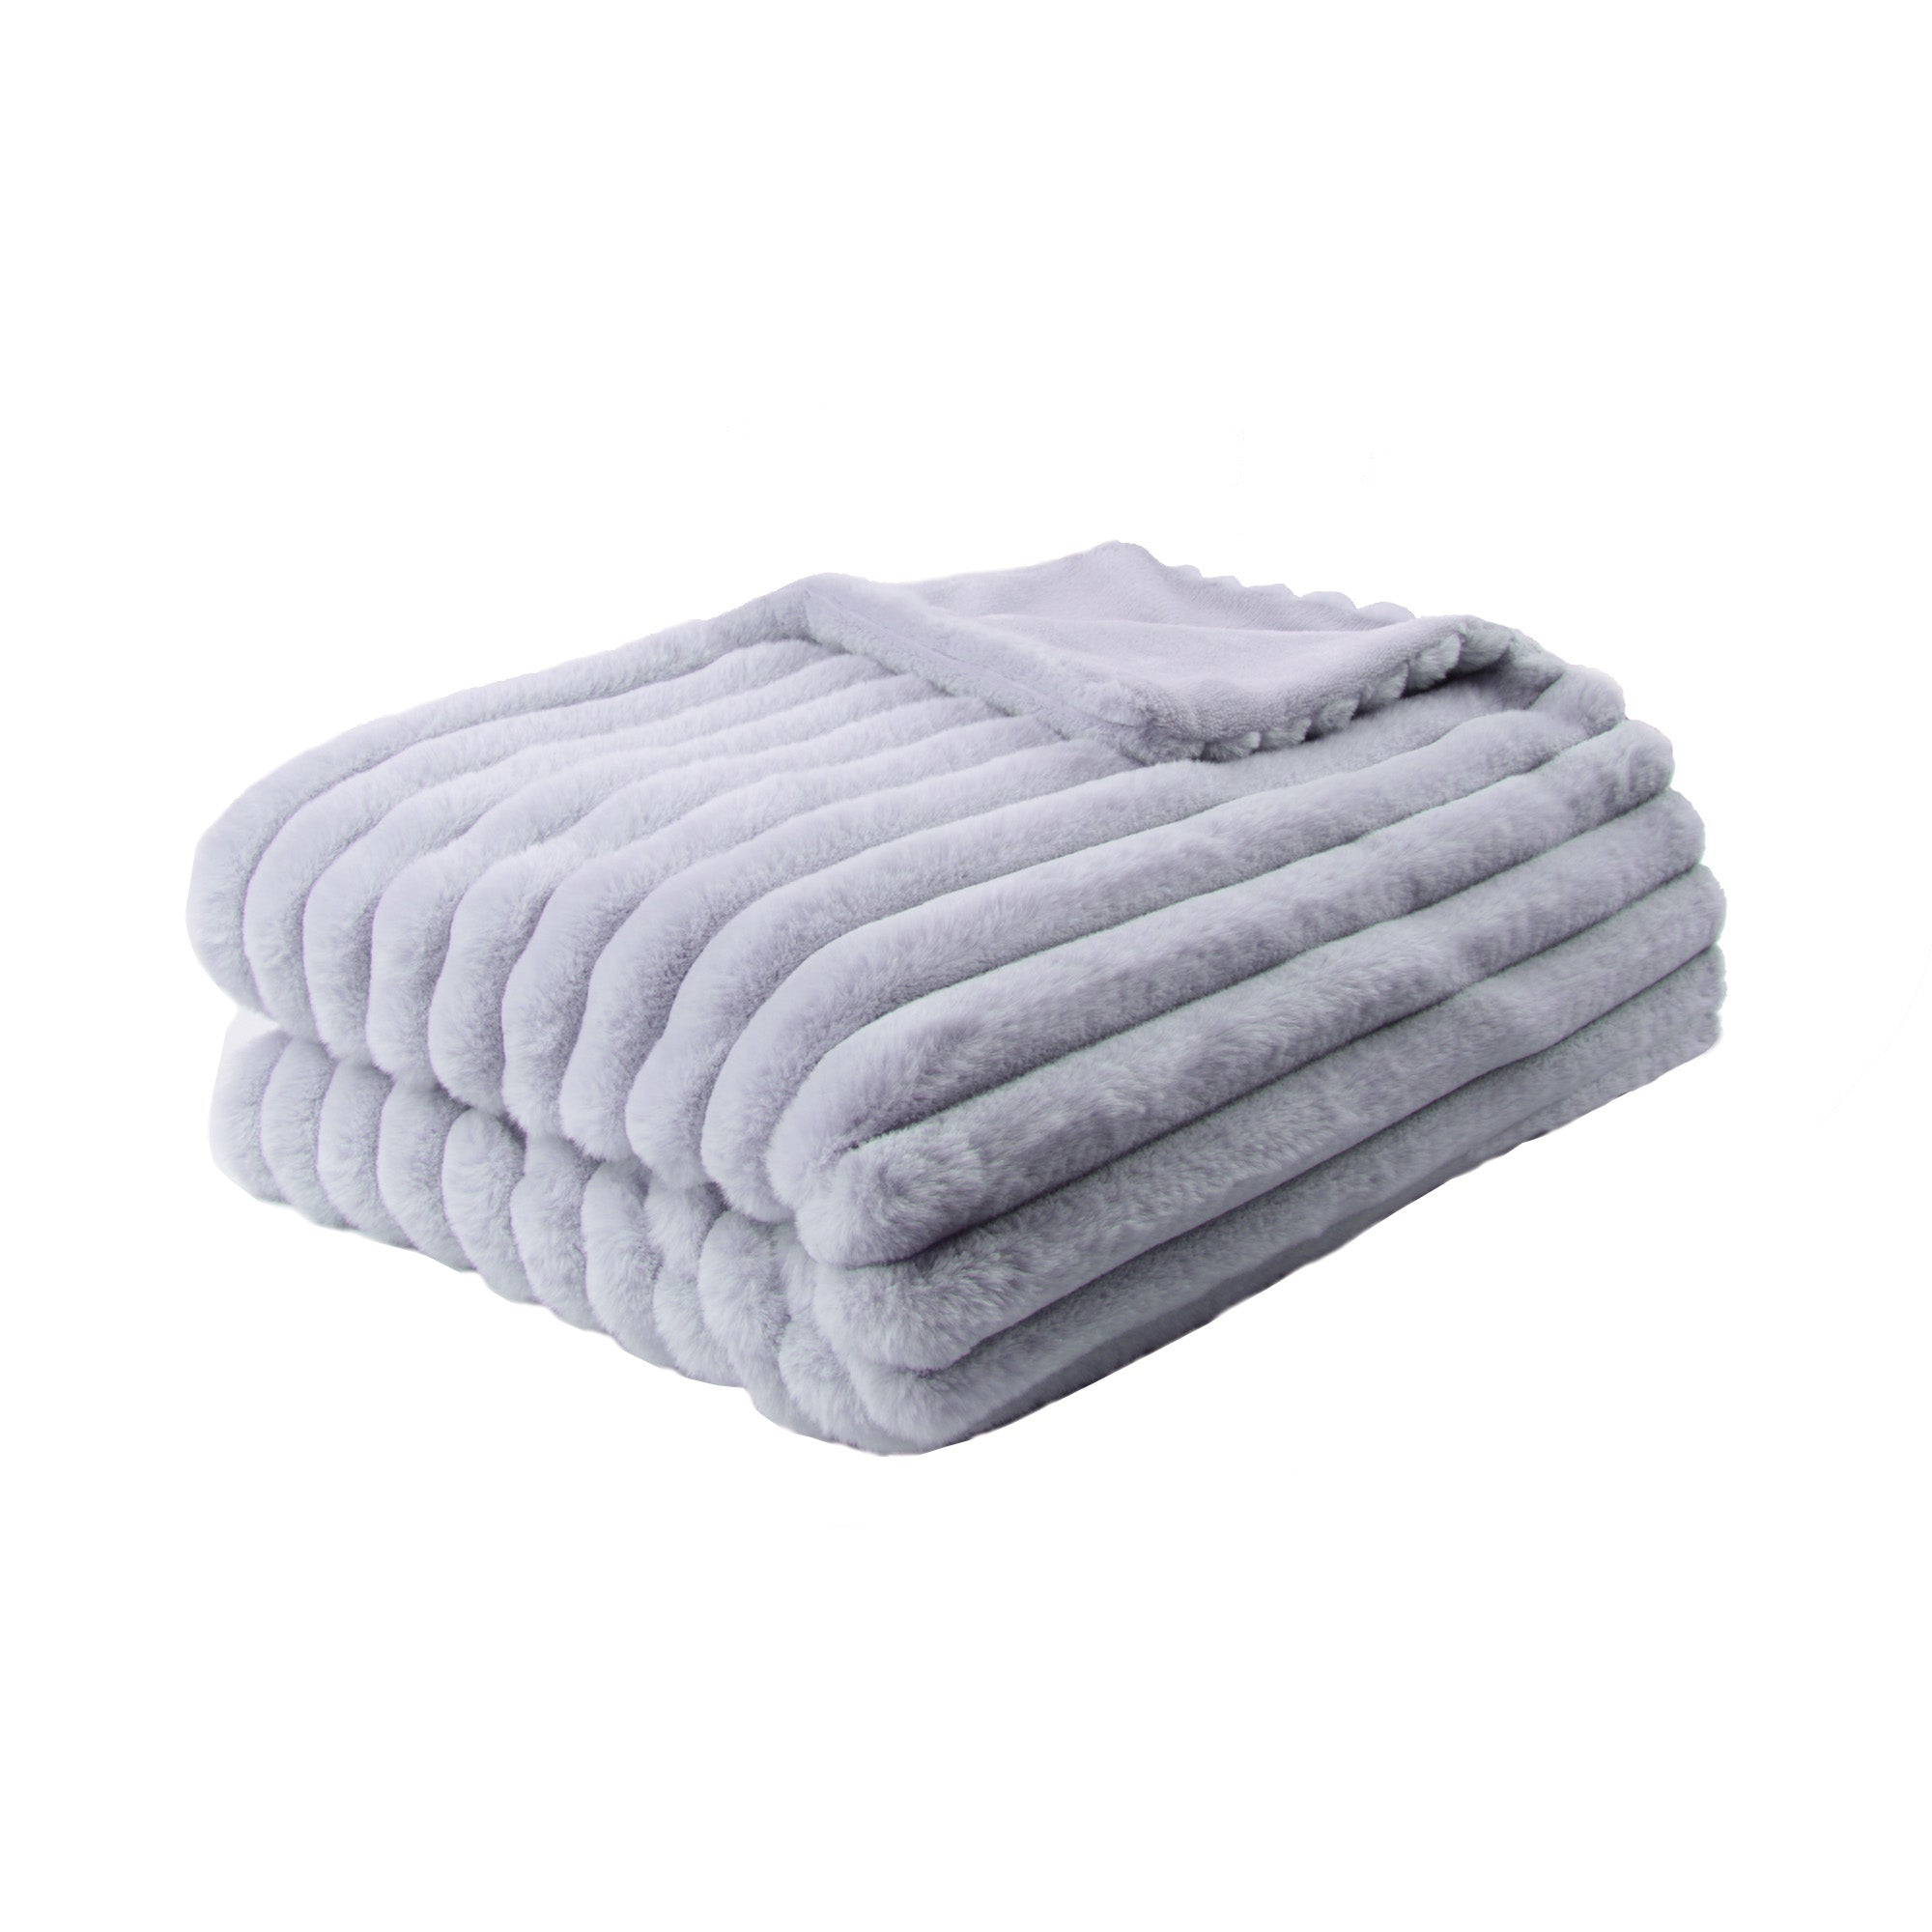 Throw Morritz by Appletree Hygge in Grey